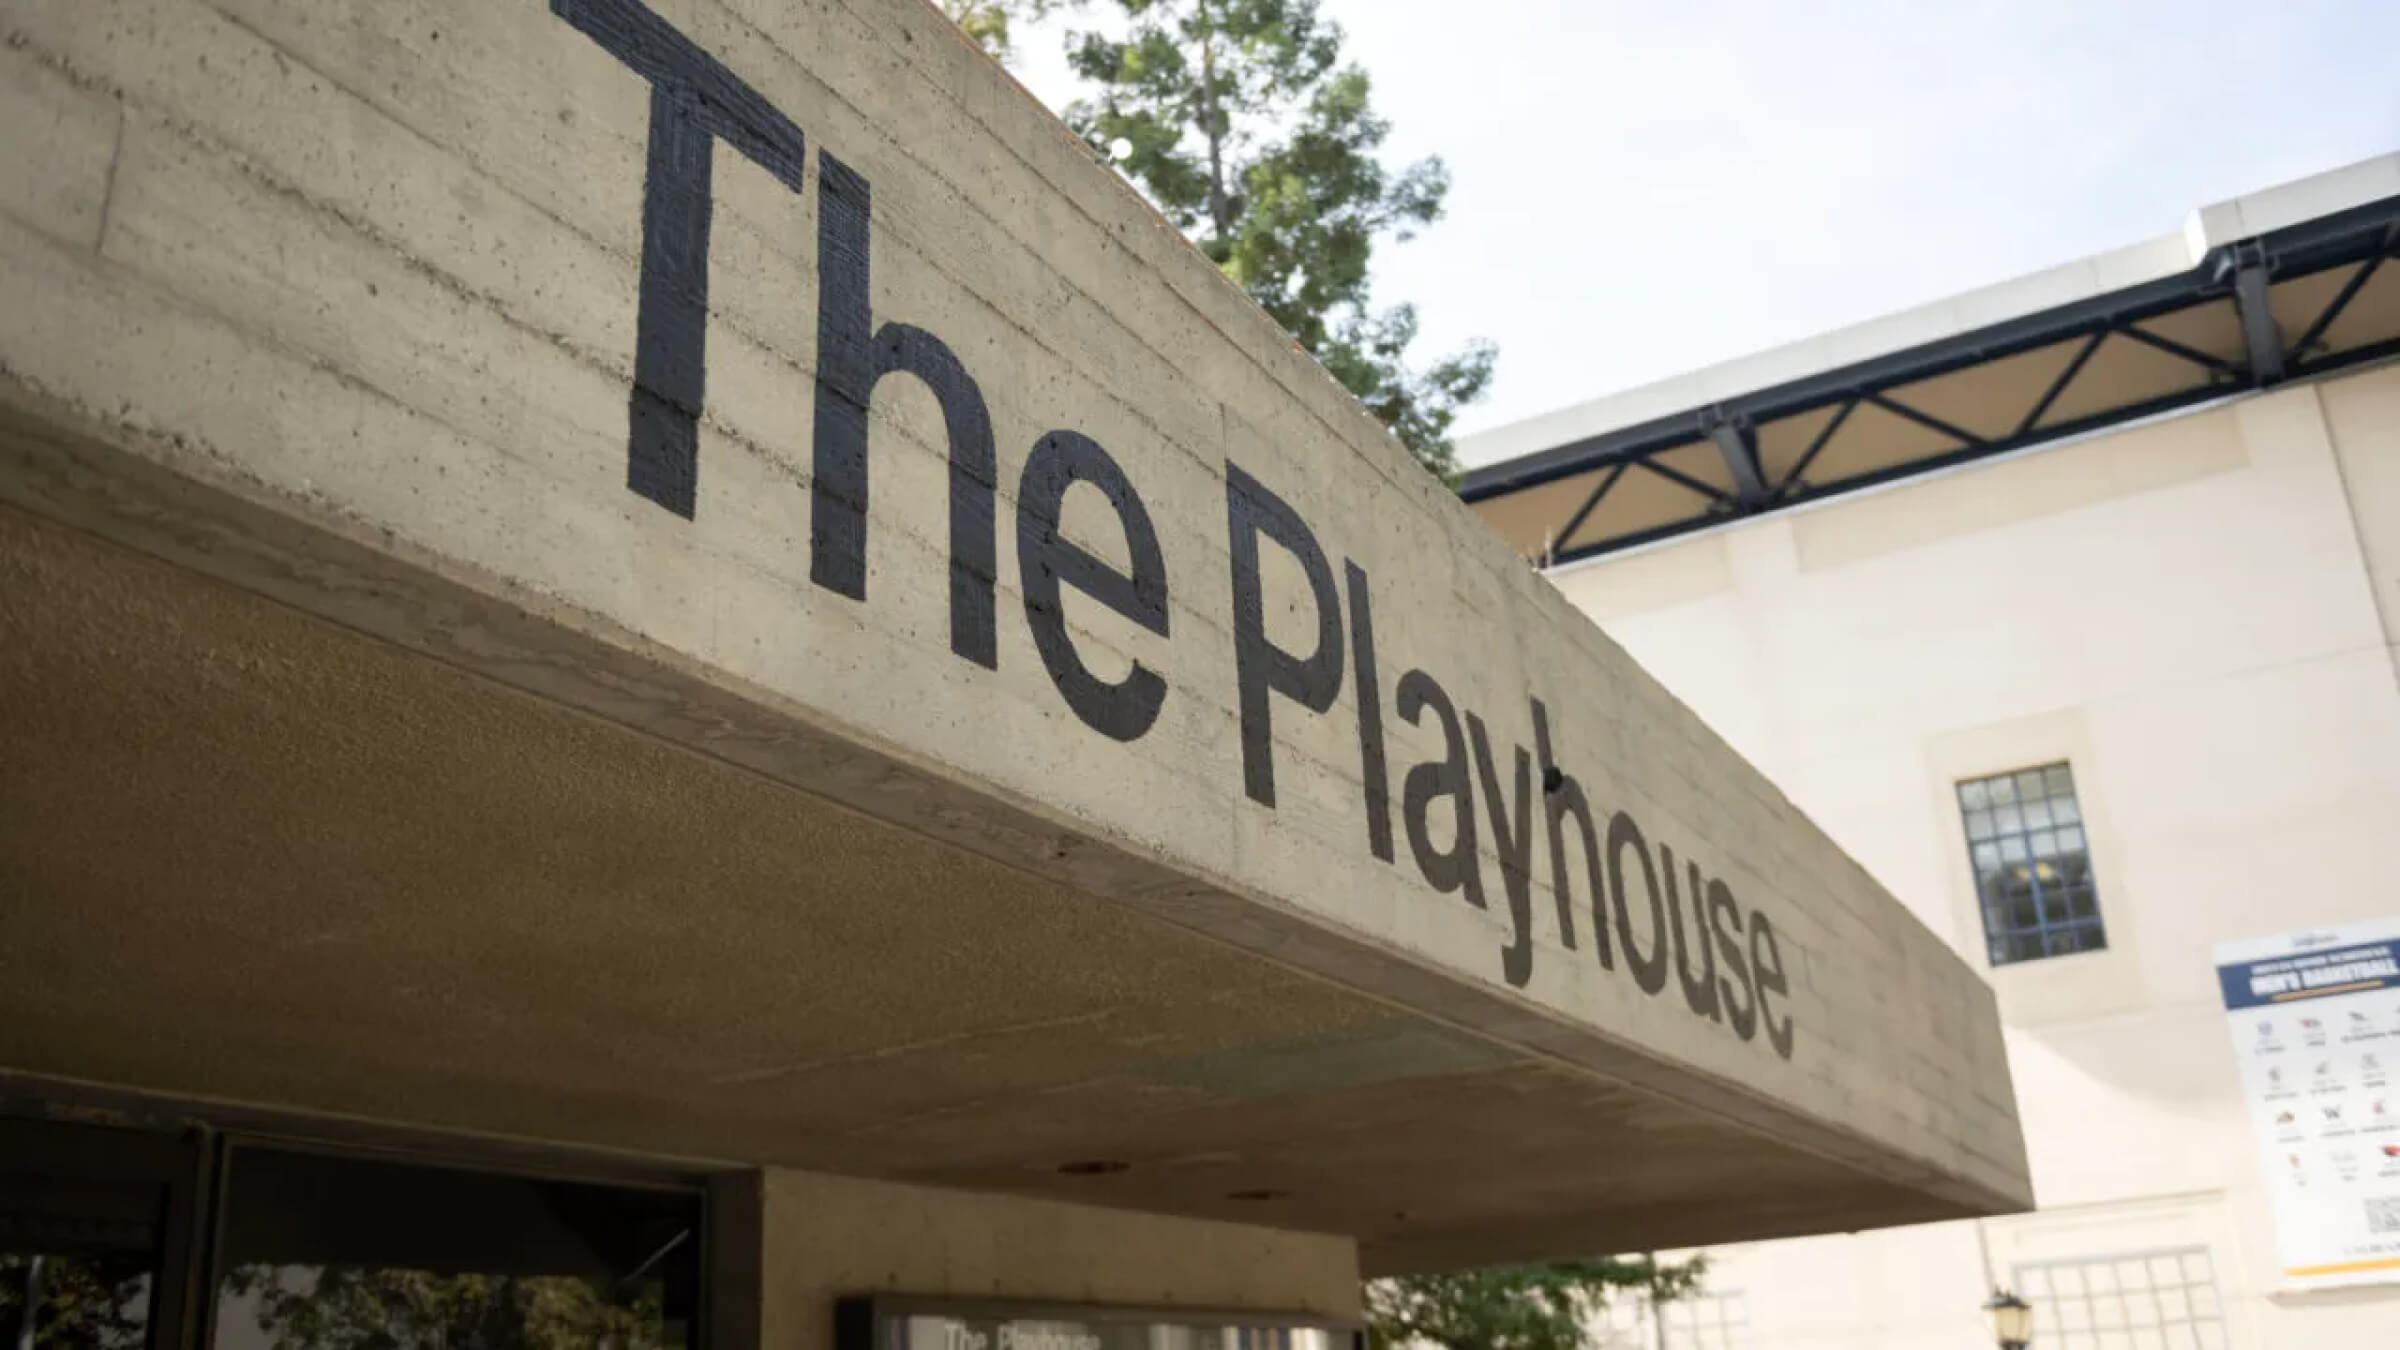 UC Berkeley's Zellerbach Playhouse was the scene of Monday night's raucous protest, which resulted in the cancellation of an event featuring an Israeli speaker. 